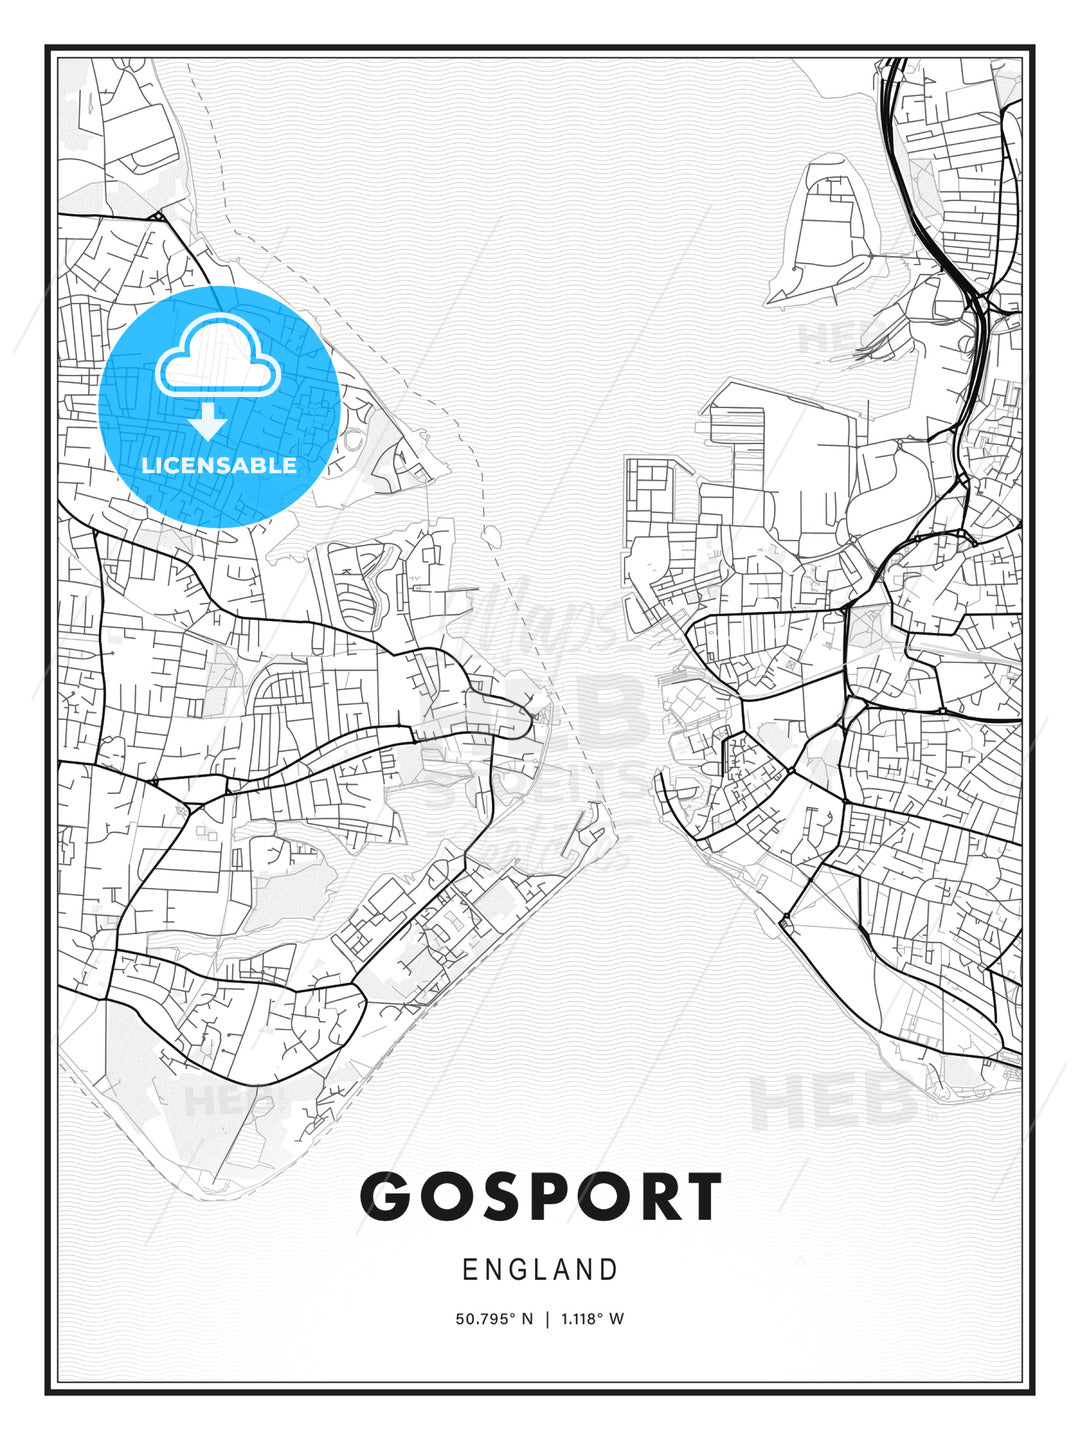 Gosport, England, Modern Print Template in Various Formats - HEBSTREITS Sketches